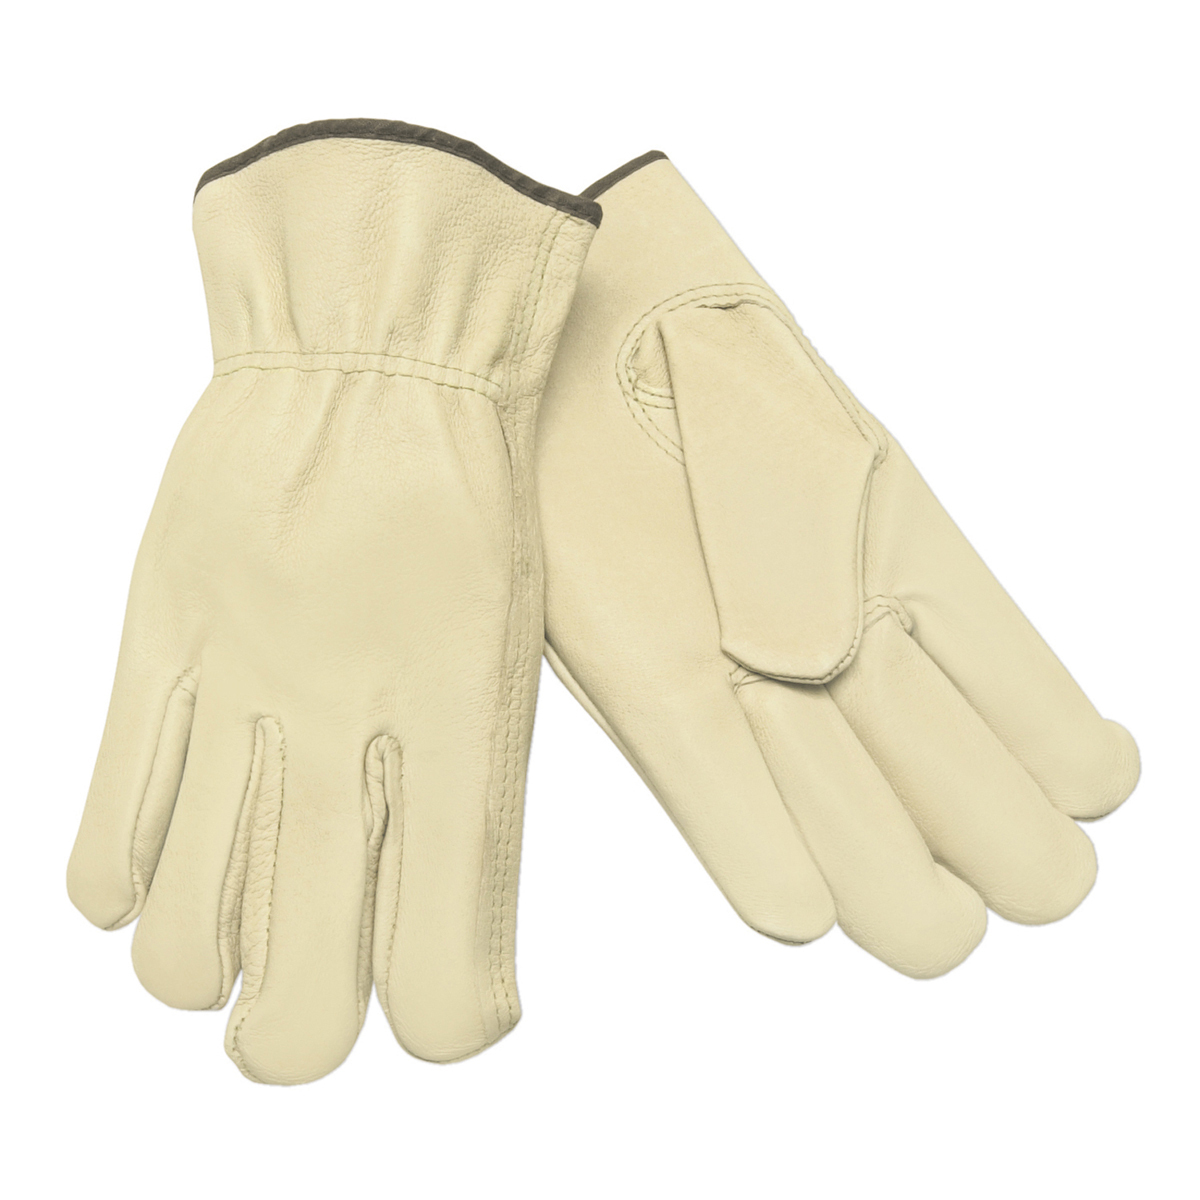 Memphis Glove X-Large Natural Competitive Value Pigskin Unlined Drivers Gloves